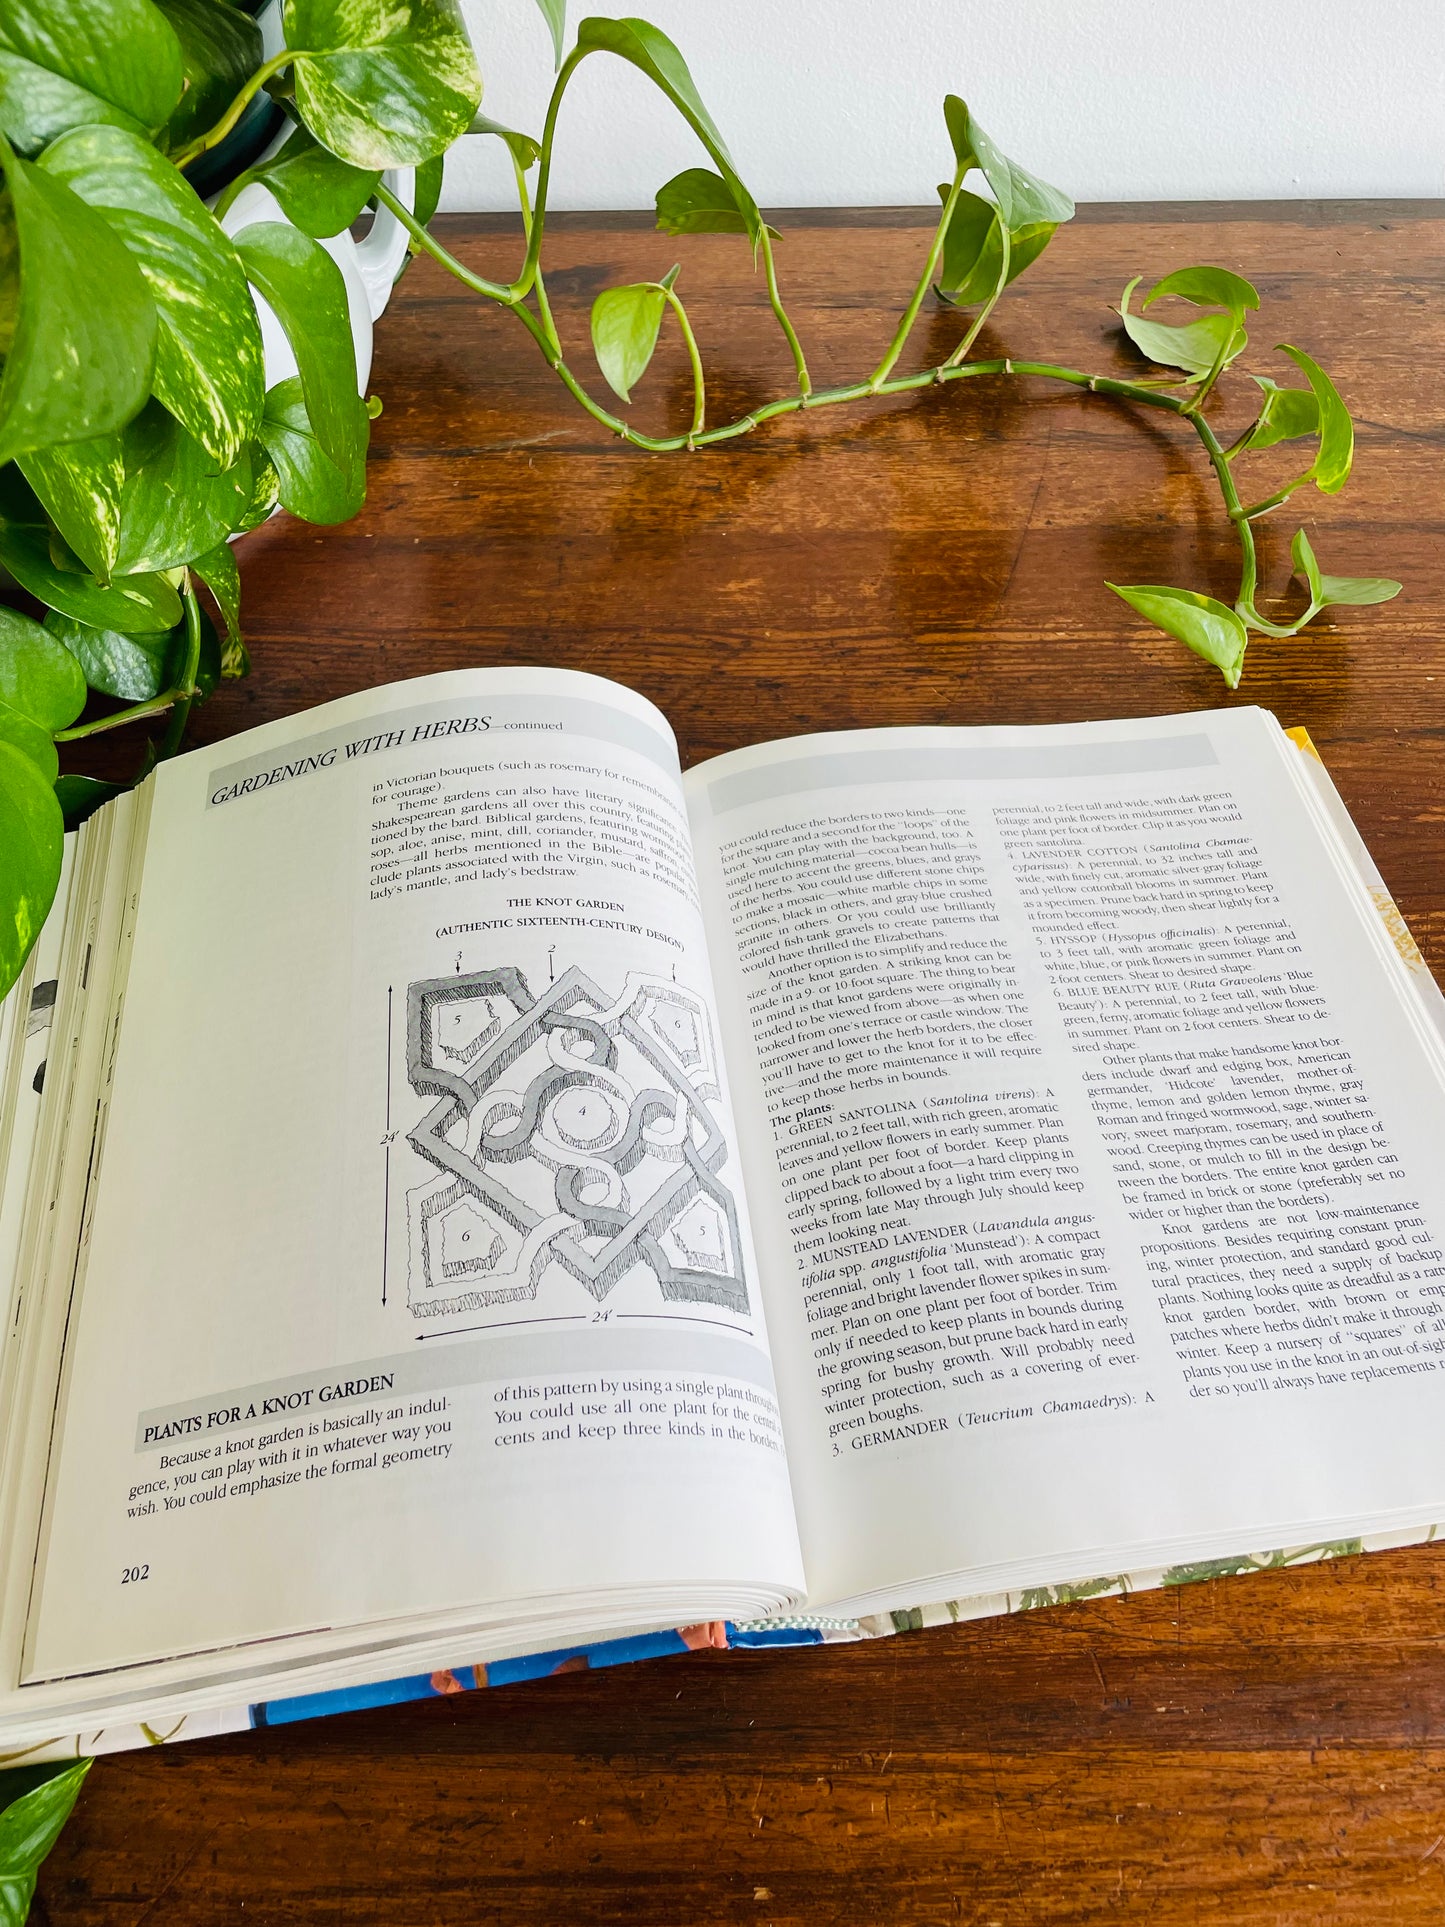 Rodale's Illustrated Encyclopedia of Herbs Hardcover Book (1987)